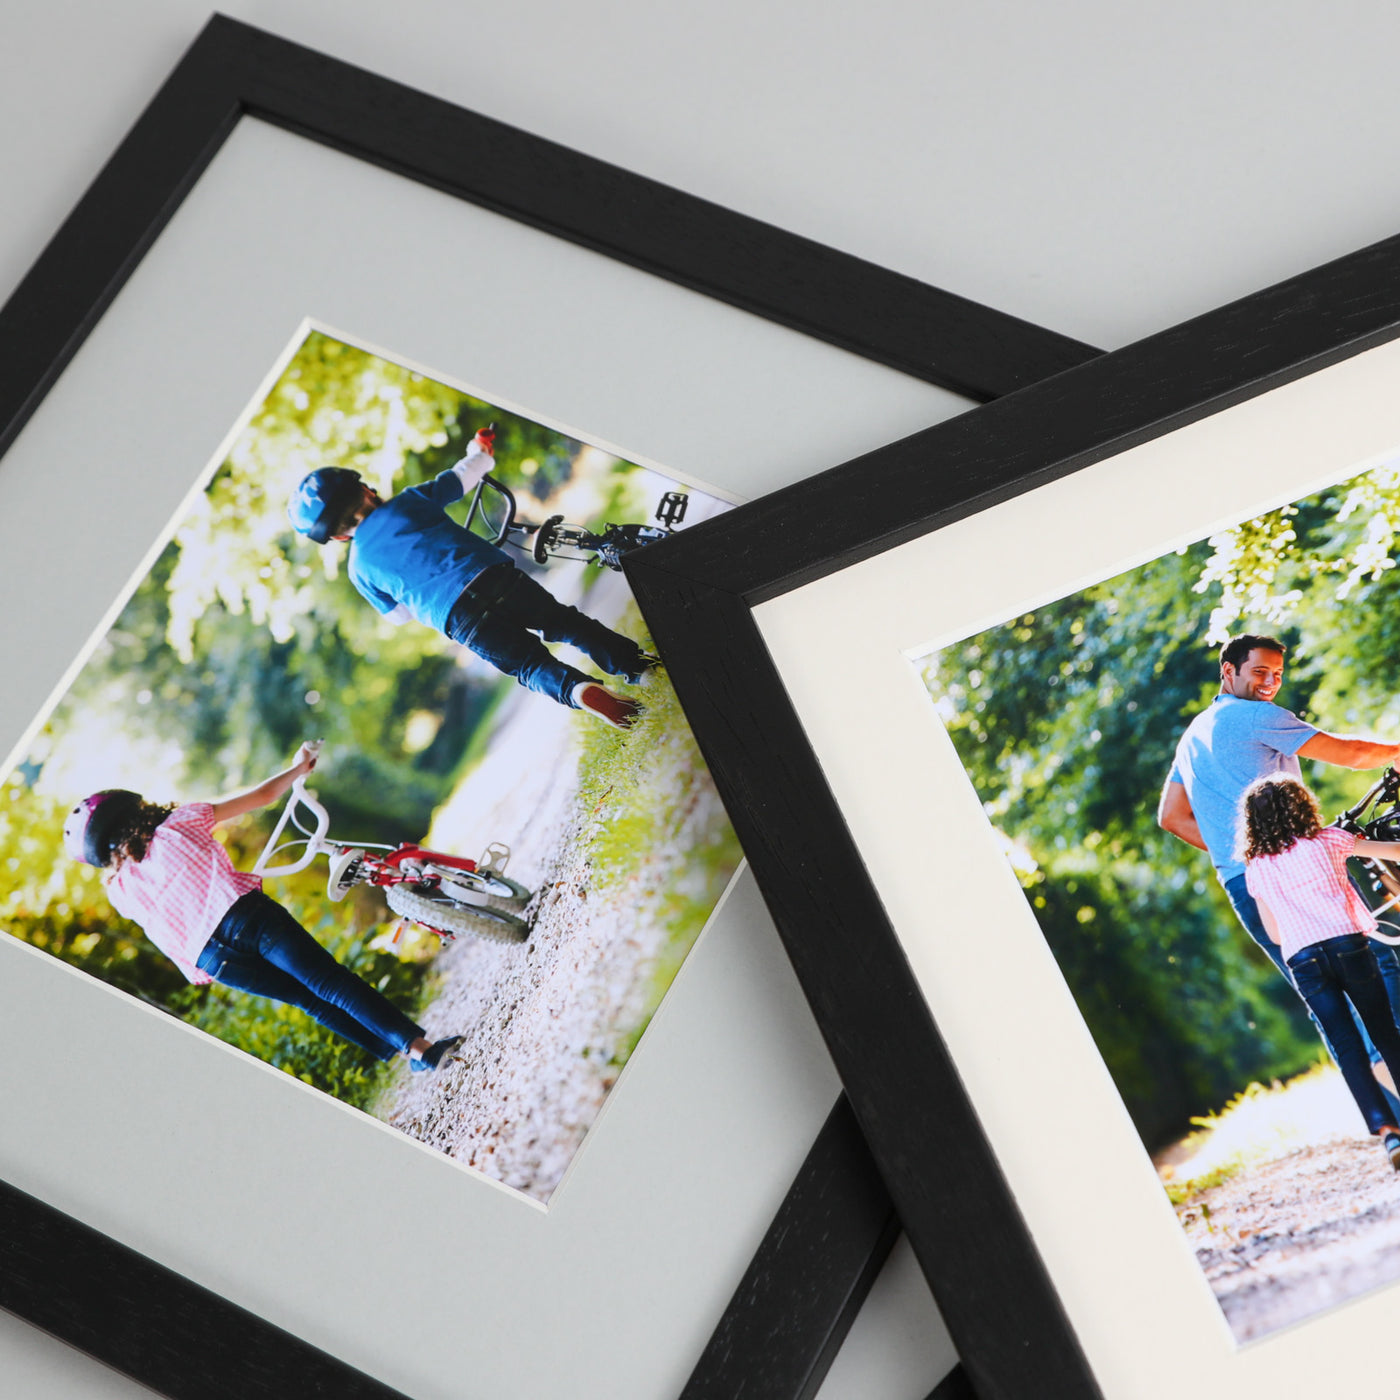 8x8 Classic Black Picture Frame with a 4x4 Mount